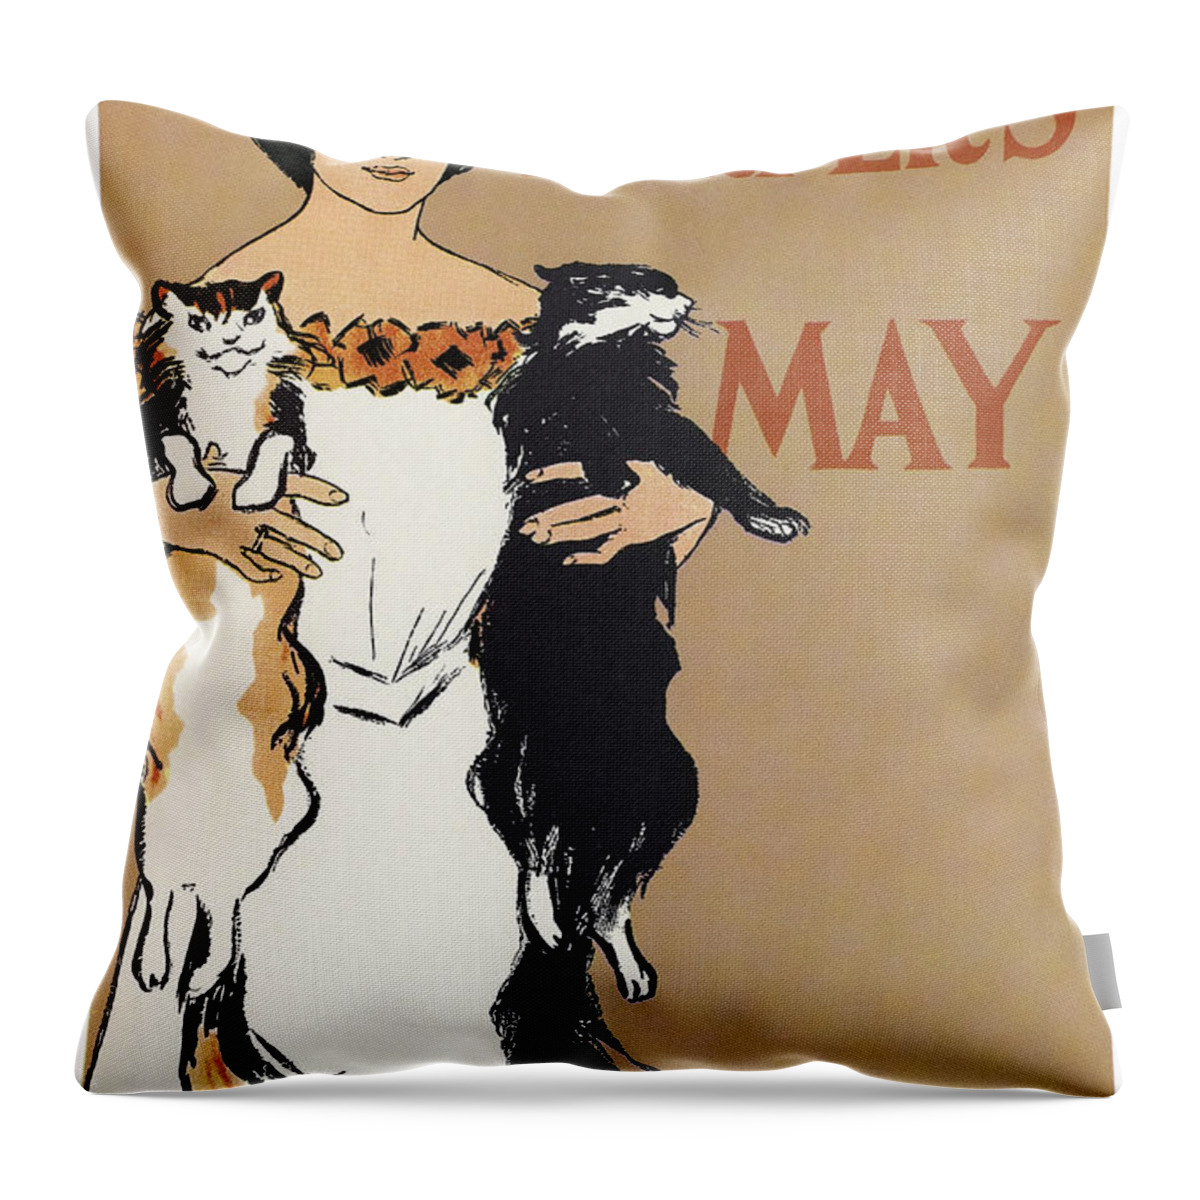 1897 Throw Pillow featuring the drawing Harper's, 1897 by Granger